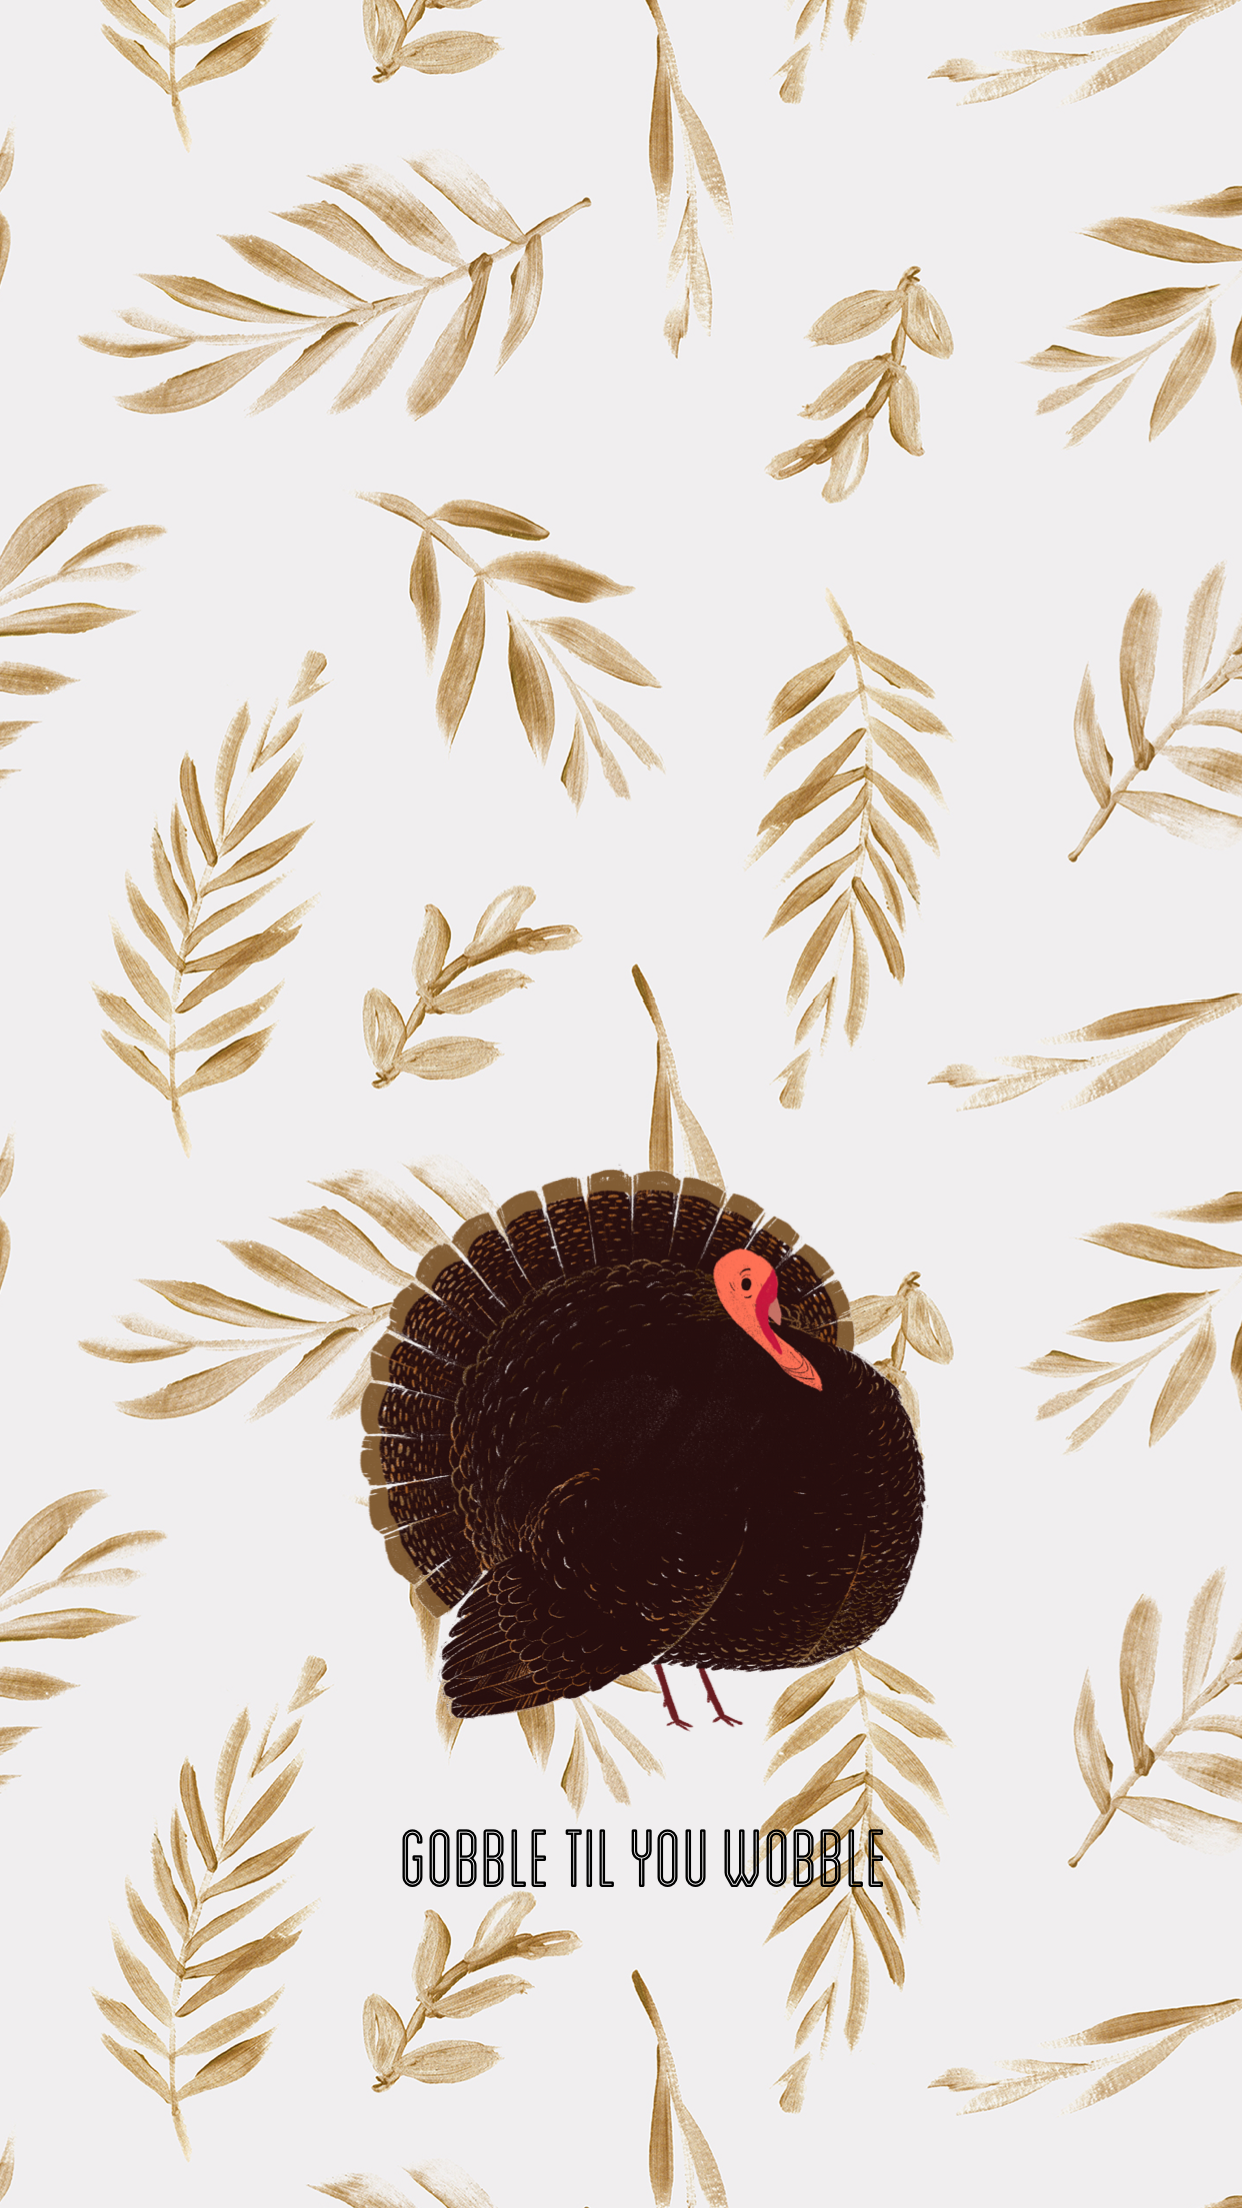 Arvo Phone Backgrounds and Wallpapers -   17 thanksgiving wallpapers aesthetic ideas